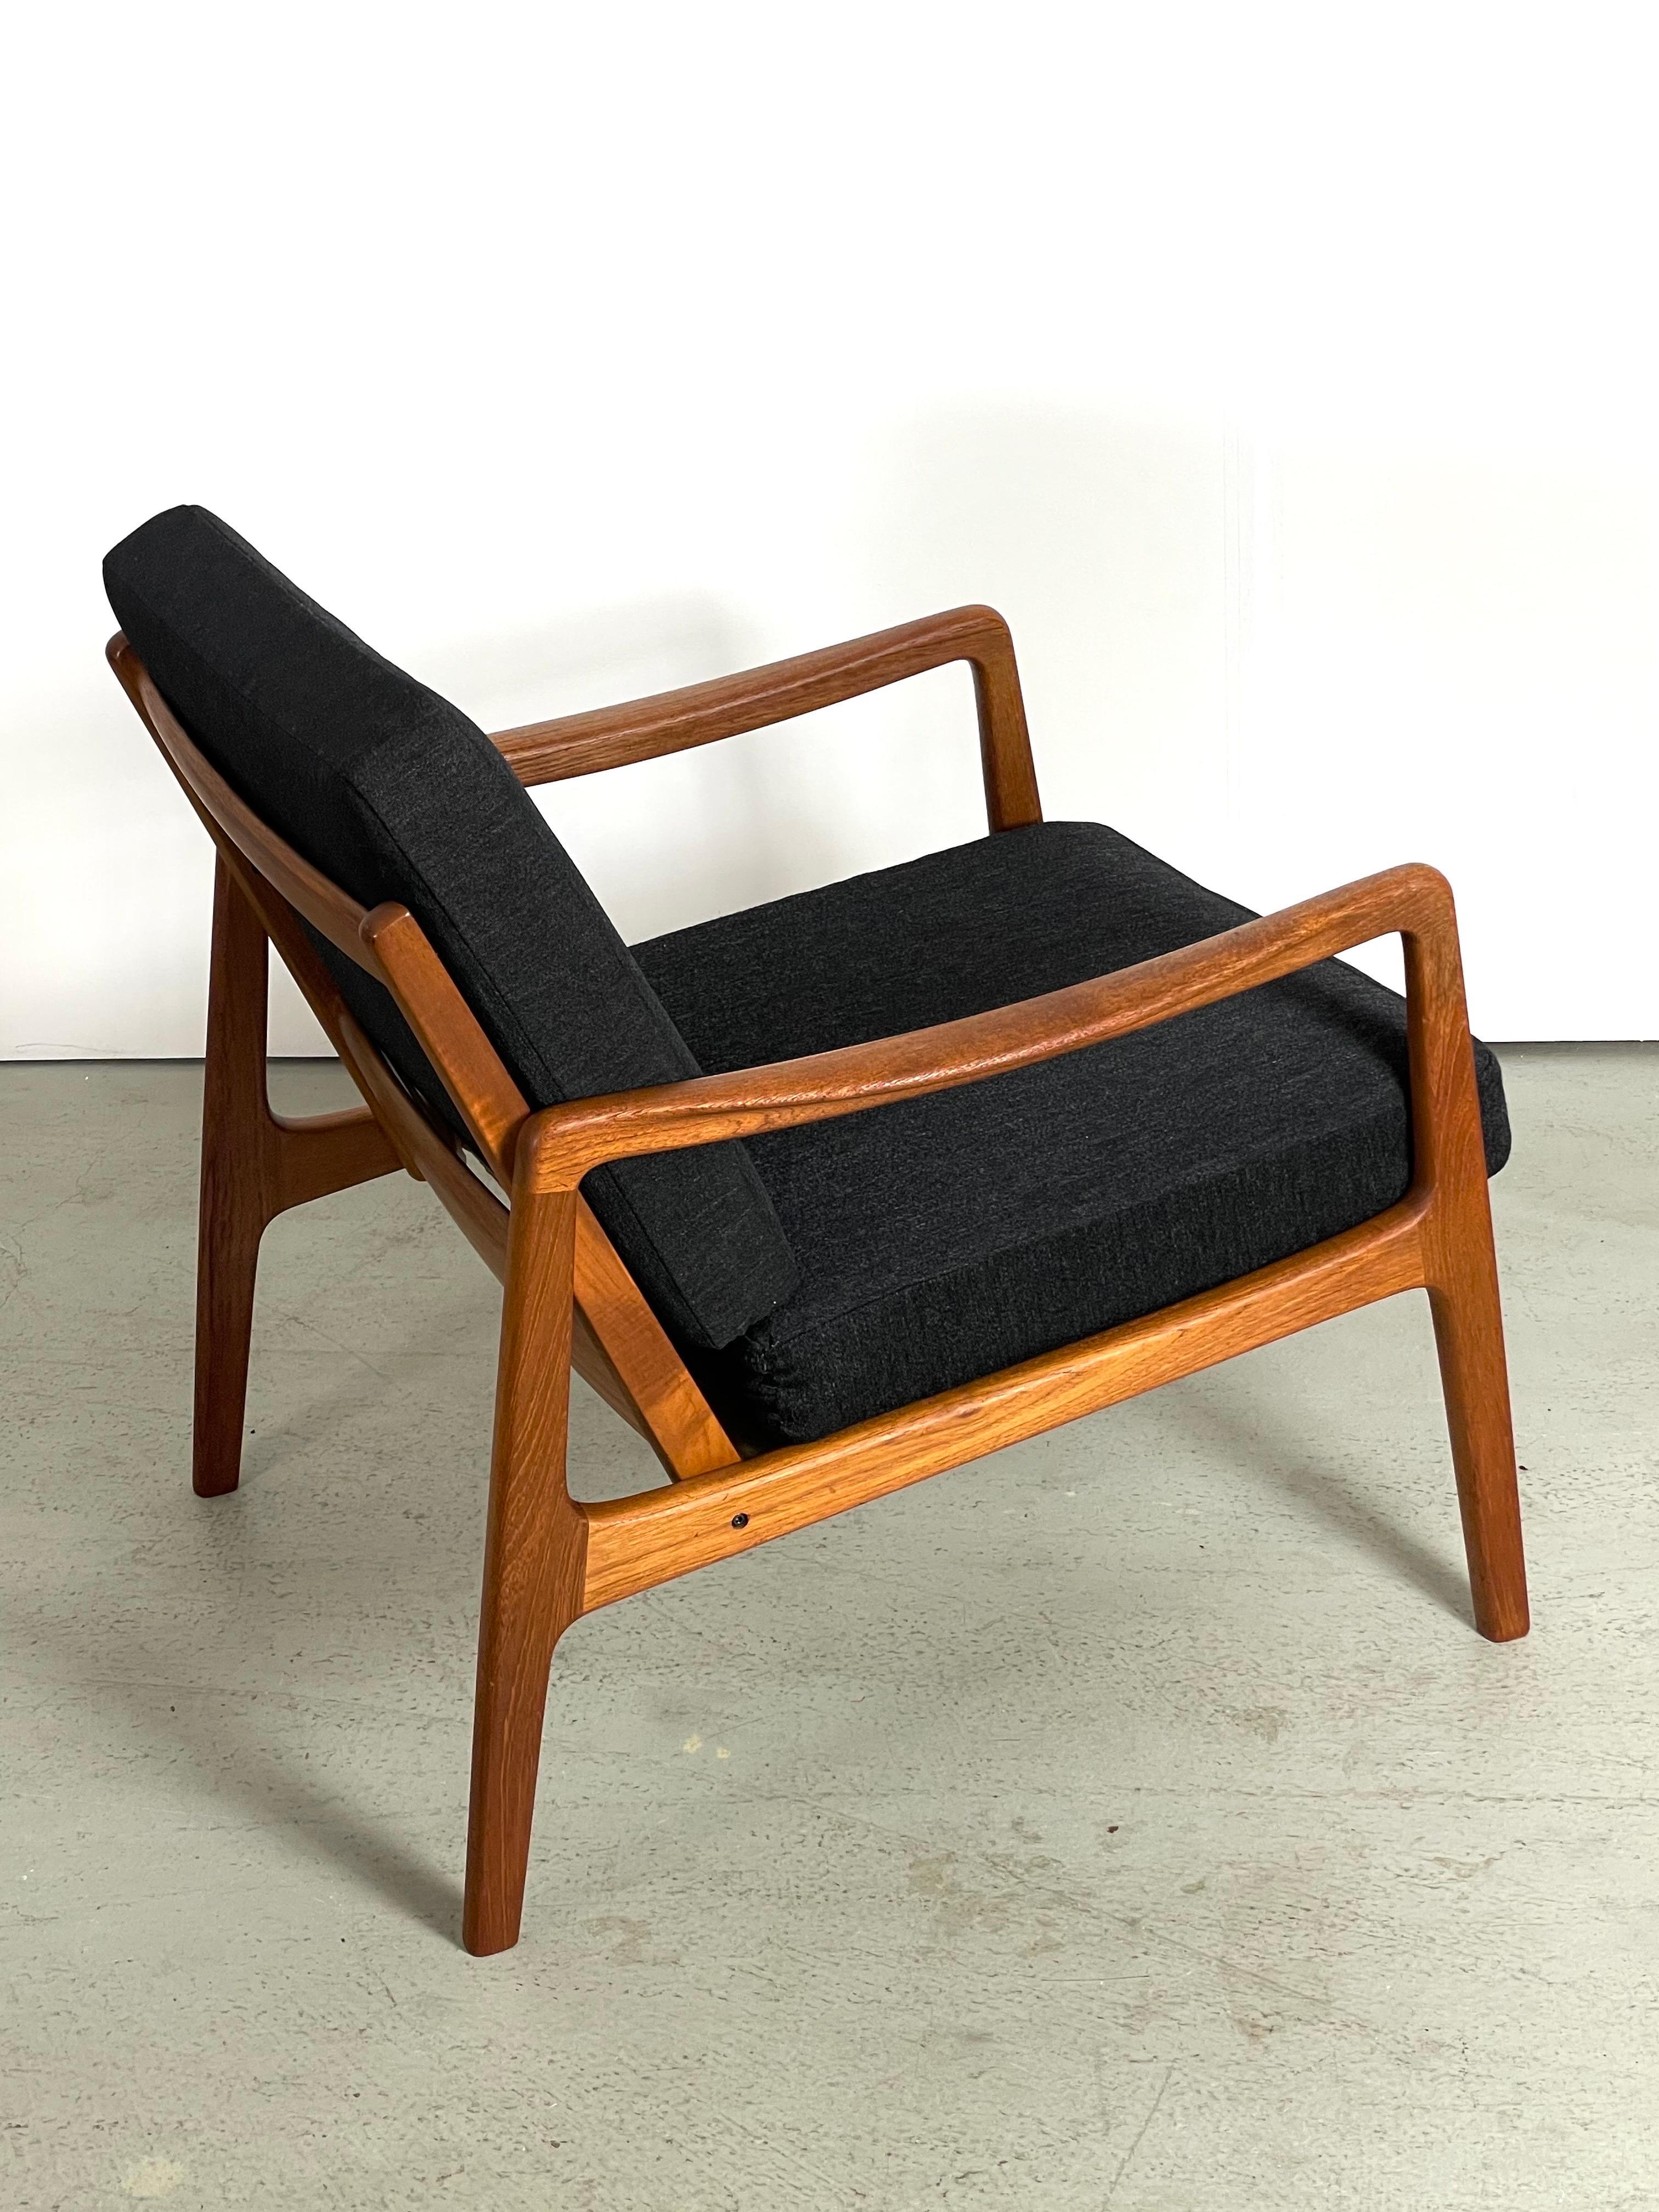 Midcentury easy chair designed by Danish Professor Ole Wanscher. Made in Denmark by France & Søn during the 1950s. This rare vintage model FD-109 lounge chair maintains the manufacturer’s mark and features a sturdy teak wooden frame with a slated